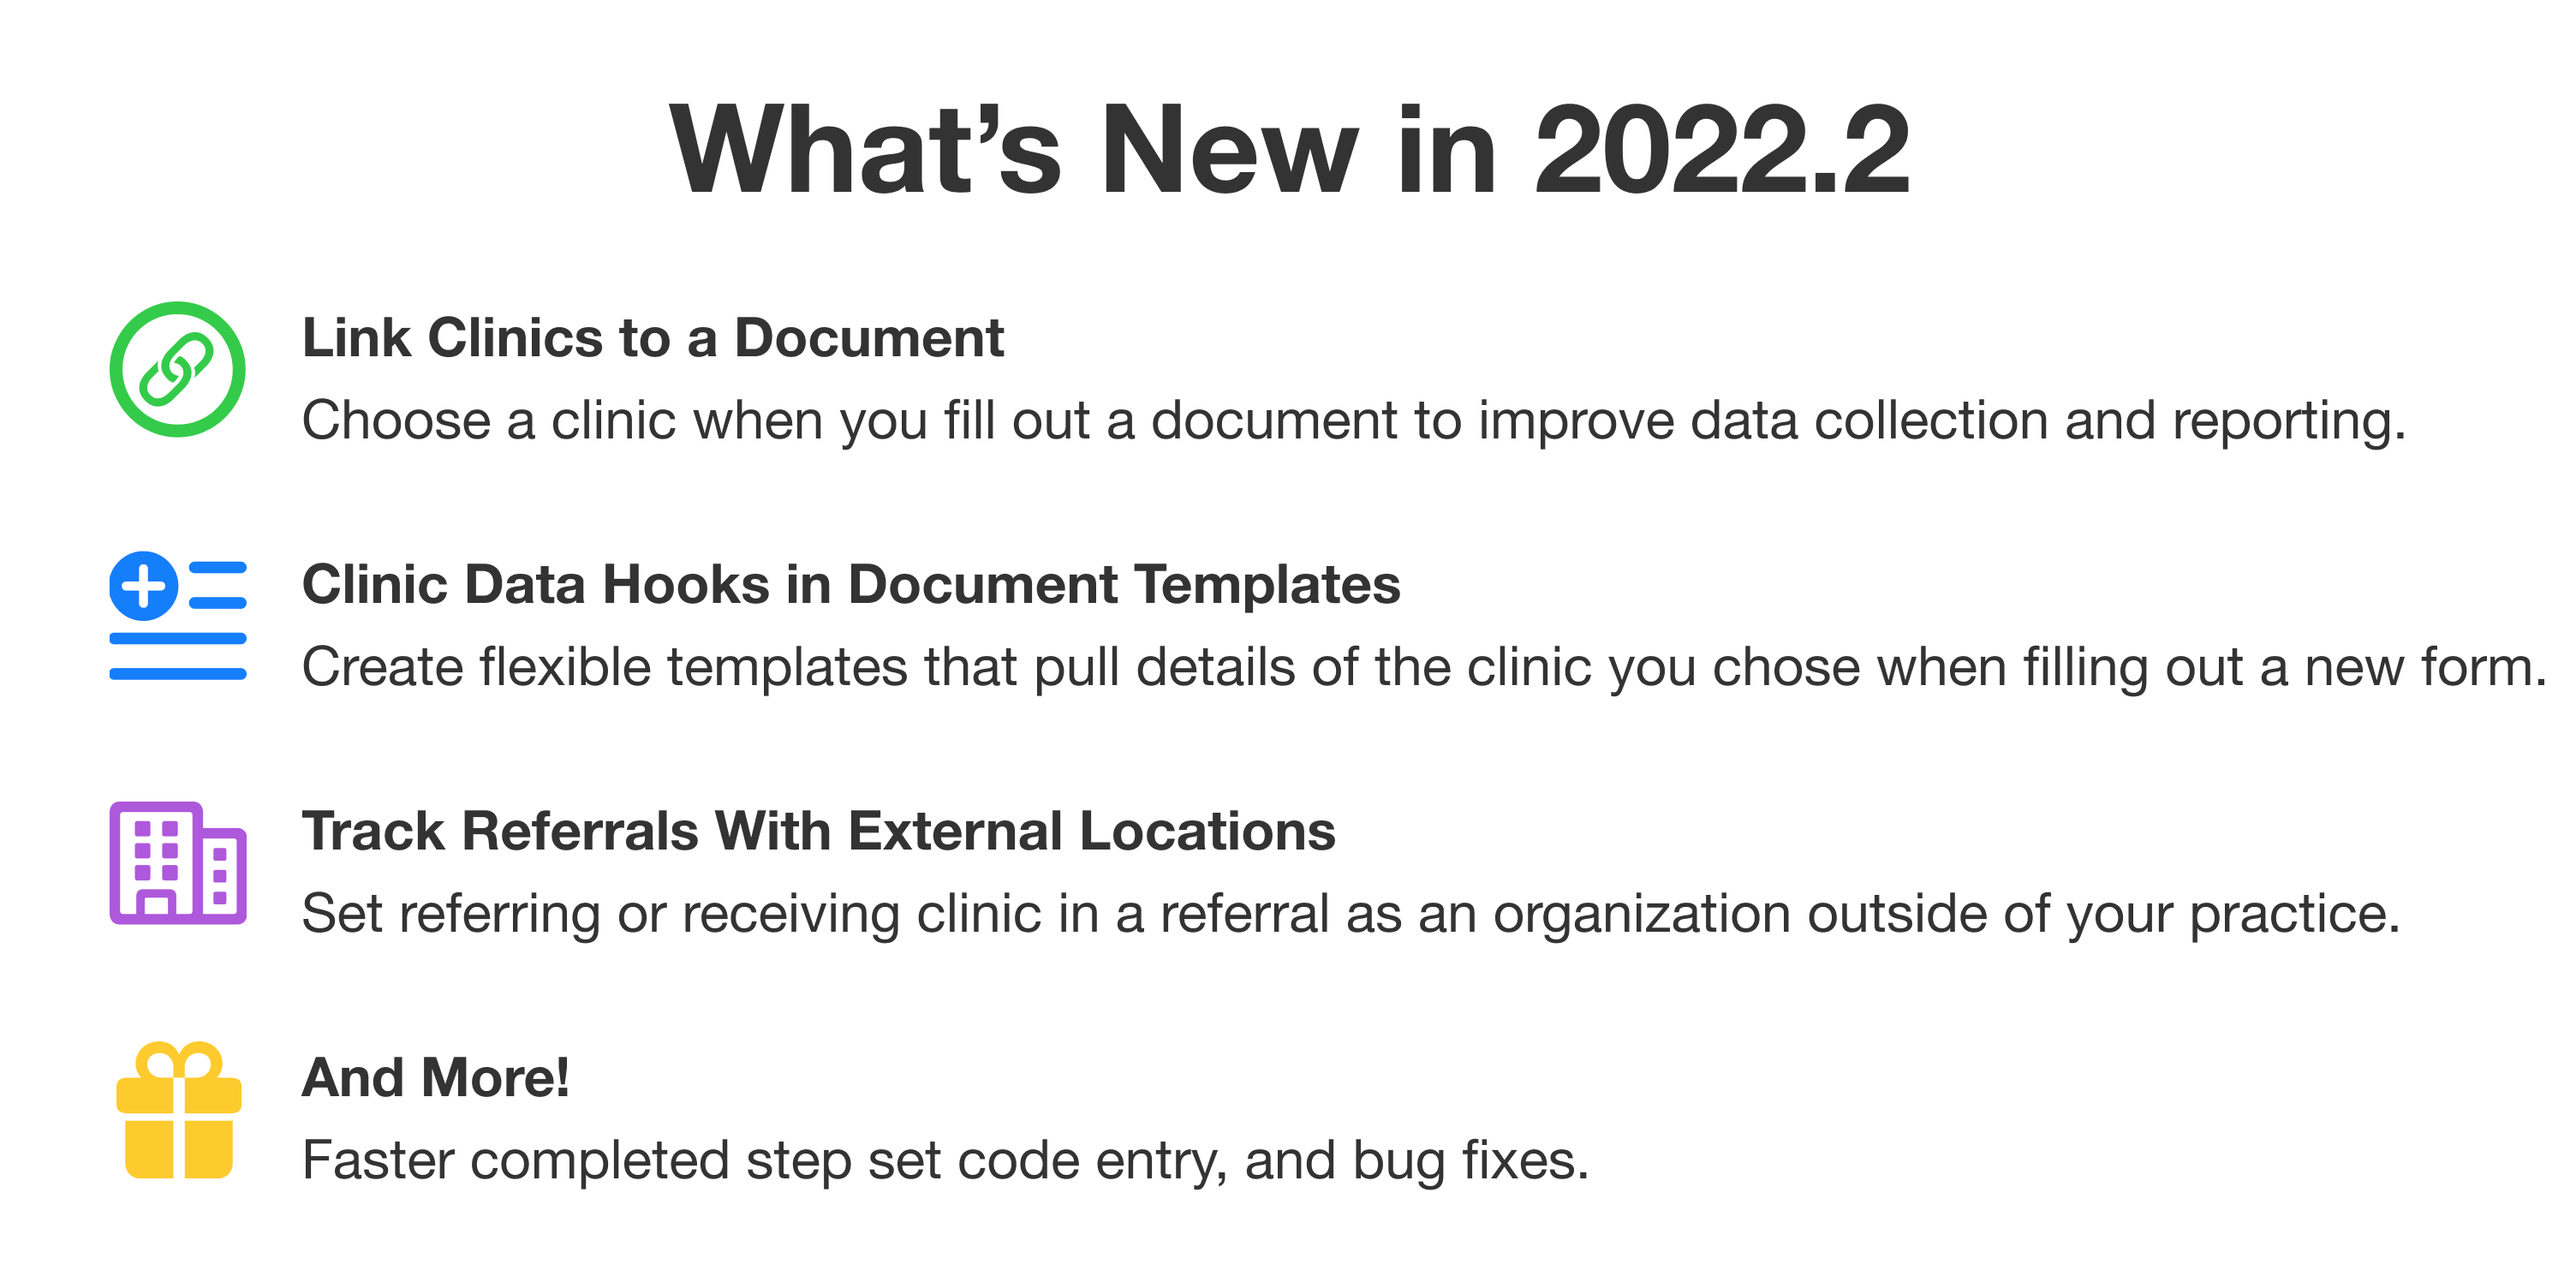 What’s New in 2022.2. First: Link Clinics to a Document. Choose a clinic when you fill out a document to improve data collection and reporting. Second: Clinic Data Hooks in Document Templates. Create flexible templates that pull details of the clinic you chose when filling out a new form. Third: Track Referrals With External Locations. Set referring or receiving clinic in a referral as an organization outside of your practice. And More! Faster completed step set code entry, and bug fixes.